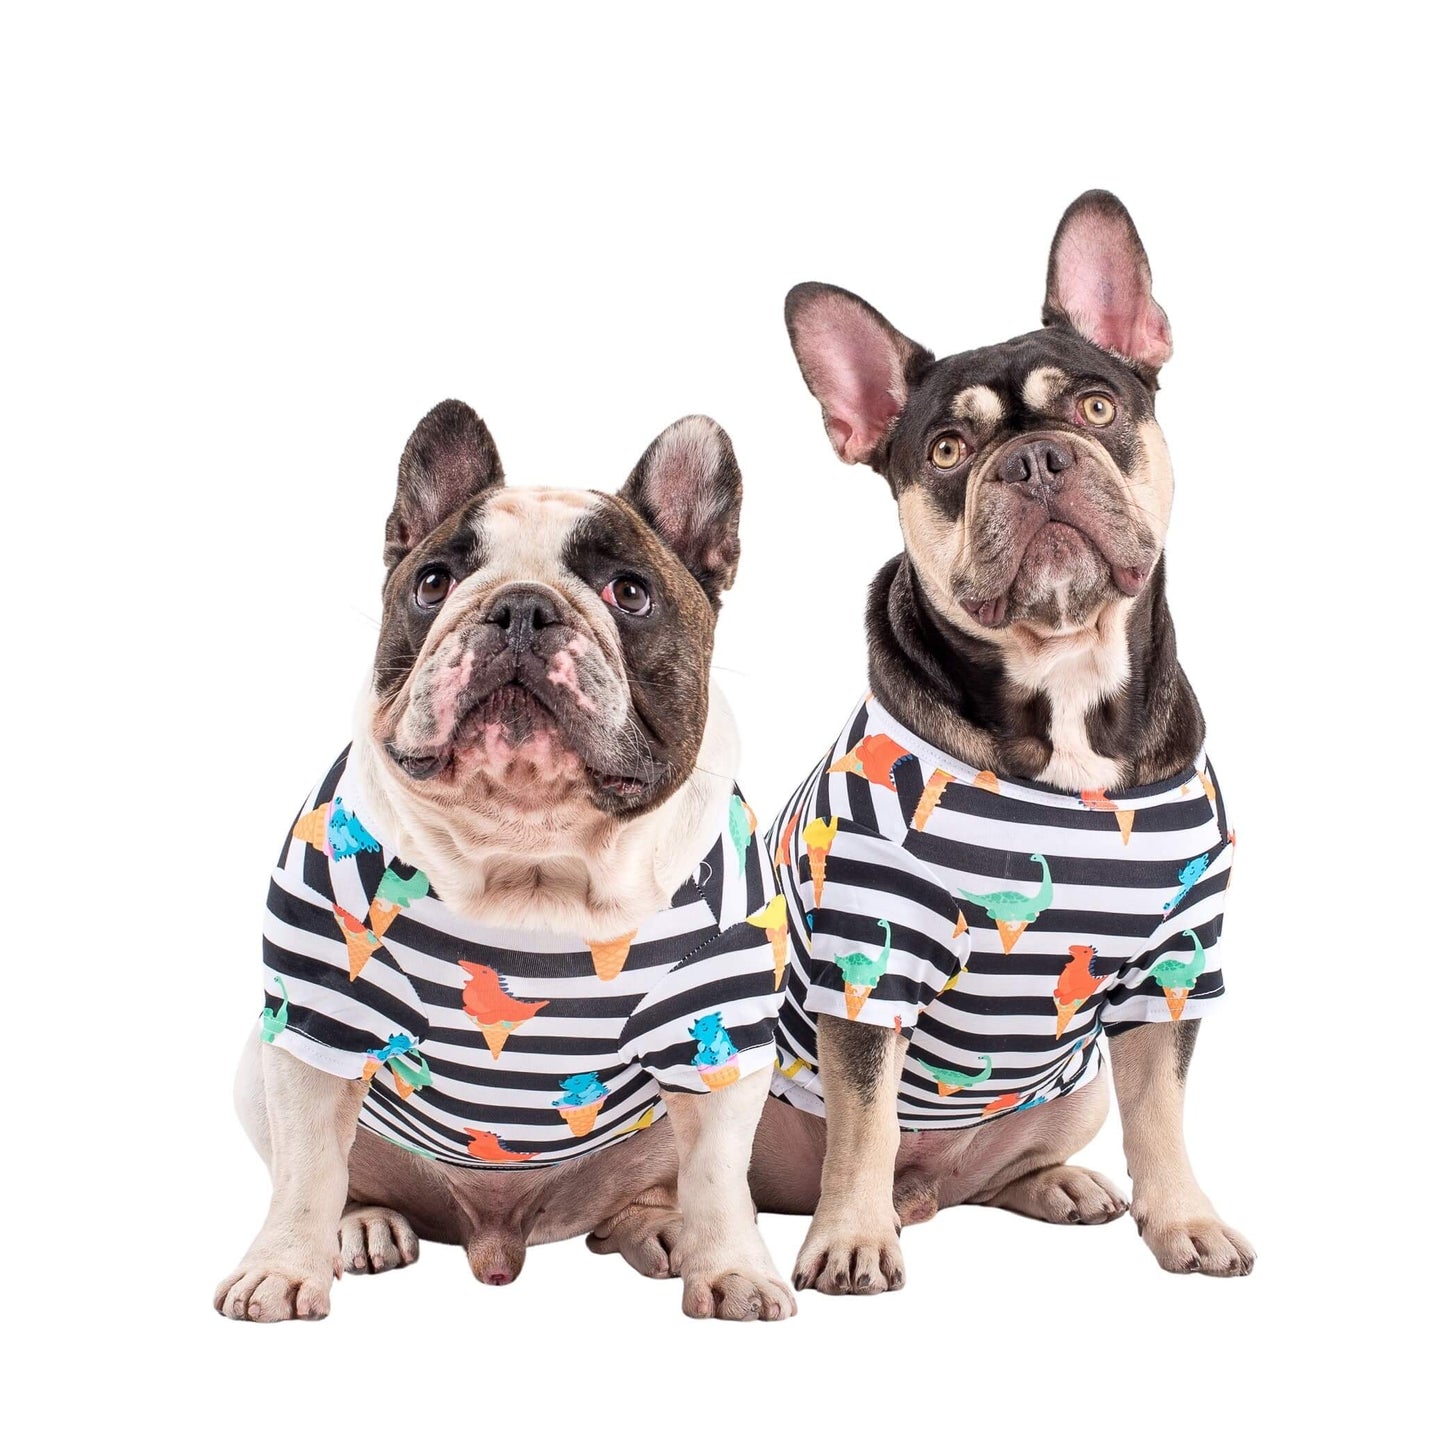 Two French Bulldogs standing front on. They are wearing dog shirts made by Vibrant Hound. The shirts are black and white stripes with dinosaurs standing on ice creams printed on them.